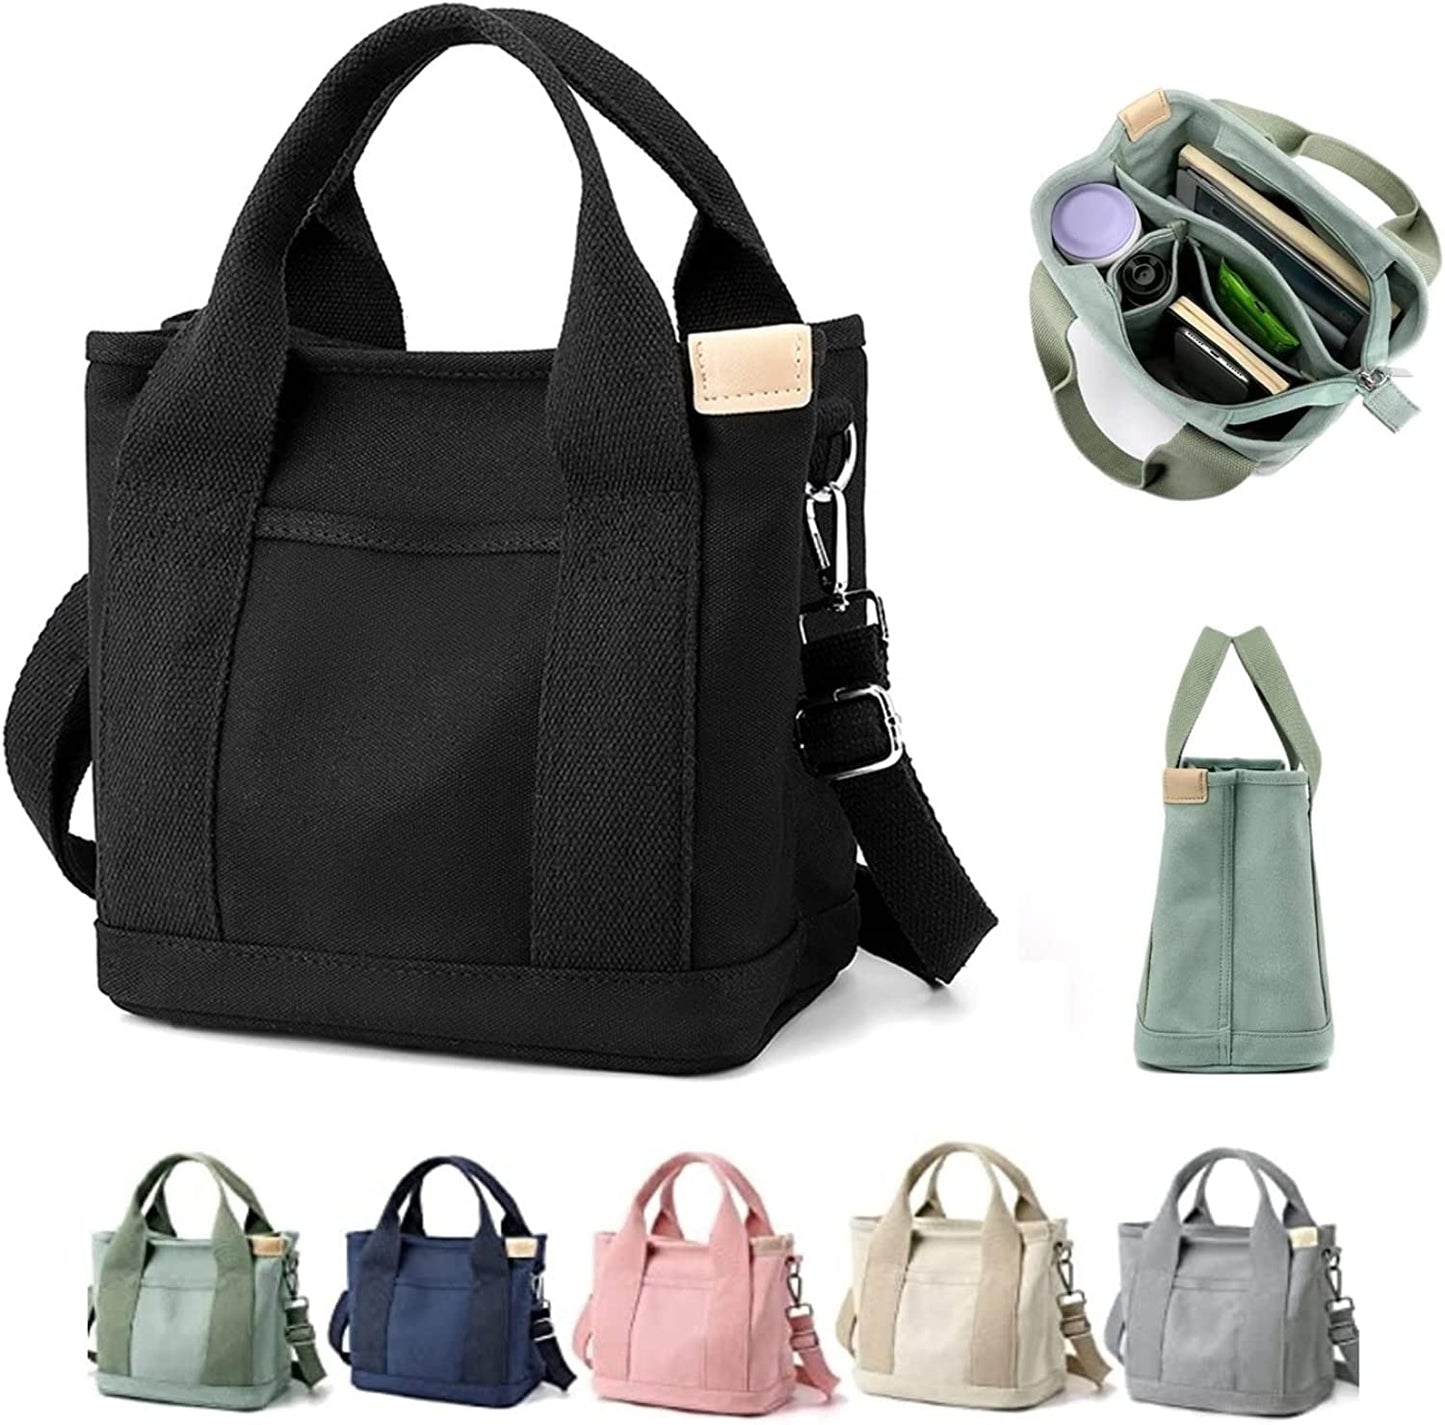 ♥️Women Simple Casual Canvas Tote Bag, Versatile Handbag For Travel and Work [2023 New Arrivals]